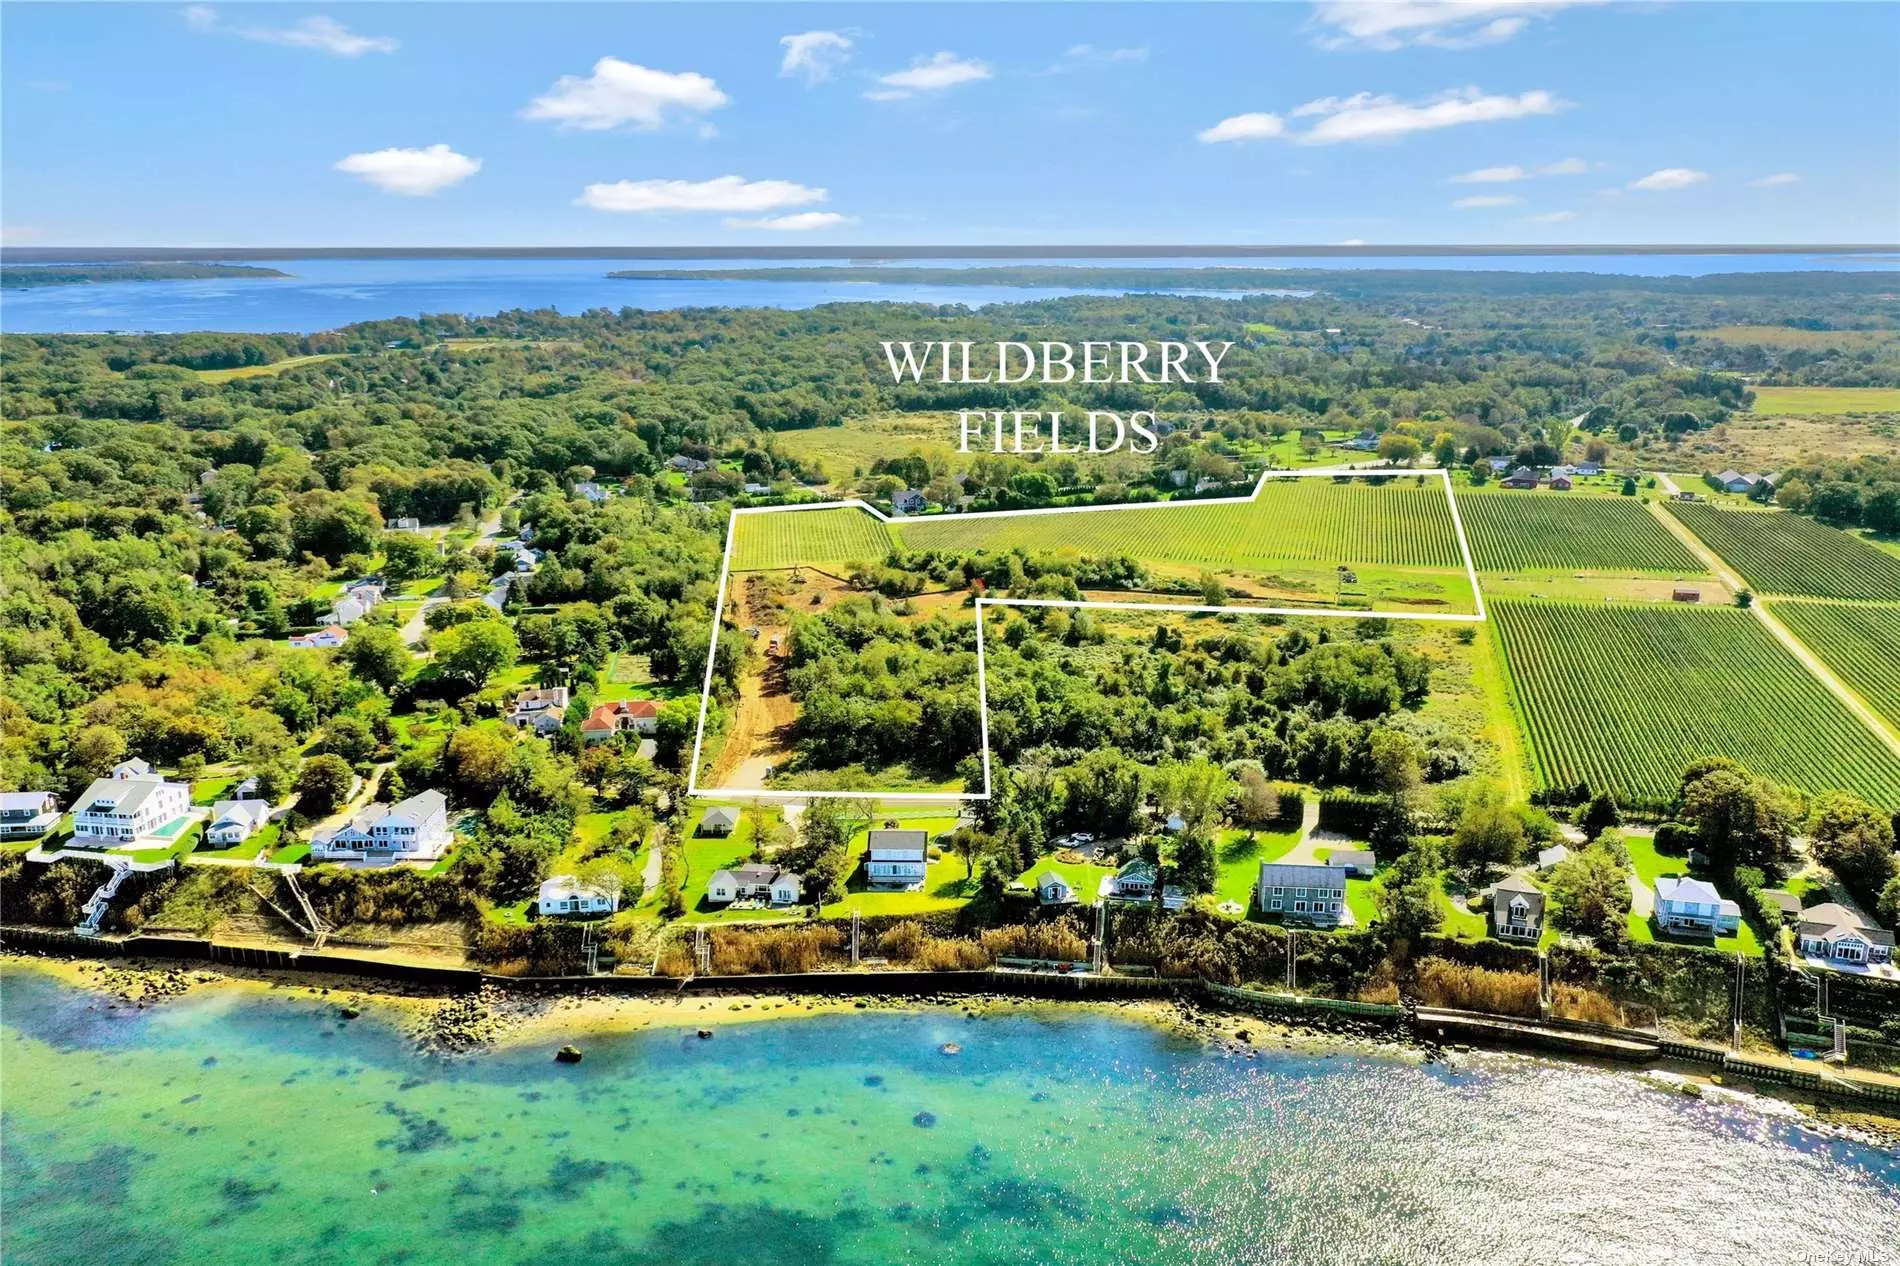 Wildberry Fields, Southold. Incomparable opportunity to own one or more building parcels in a prime Southold location. Yes, location still matters. First offering of an approved subdivision of 9 level, buildable lots ranging in size from 1/2 - 3/4+ acres. Each parcel will have underground utilitie, s in place. Located on a country lane with miles of low traffic, meandering road perfect for family walks, runners, and bicycle enthusiasts. Wildberry Fields is part of the Southold Park District, within close proximity to 3 magnificent Sound beaches. Parcels will be sold subject to review and acceptance of covenants & restrictions. All of this amidst the bucolic North Fork vineyards, farm stands, and restaurants nearby. There&rsquo;s nothing else like it. Build your dream home.